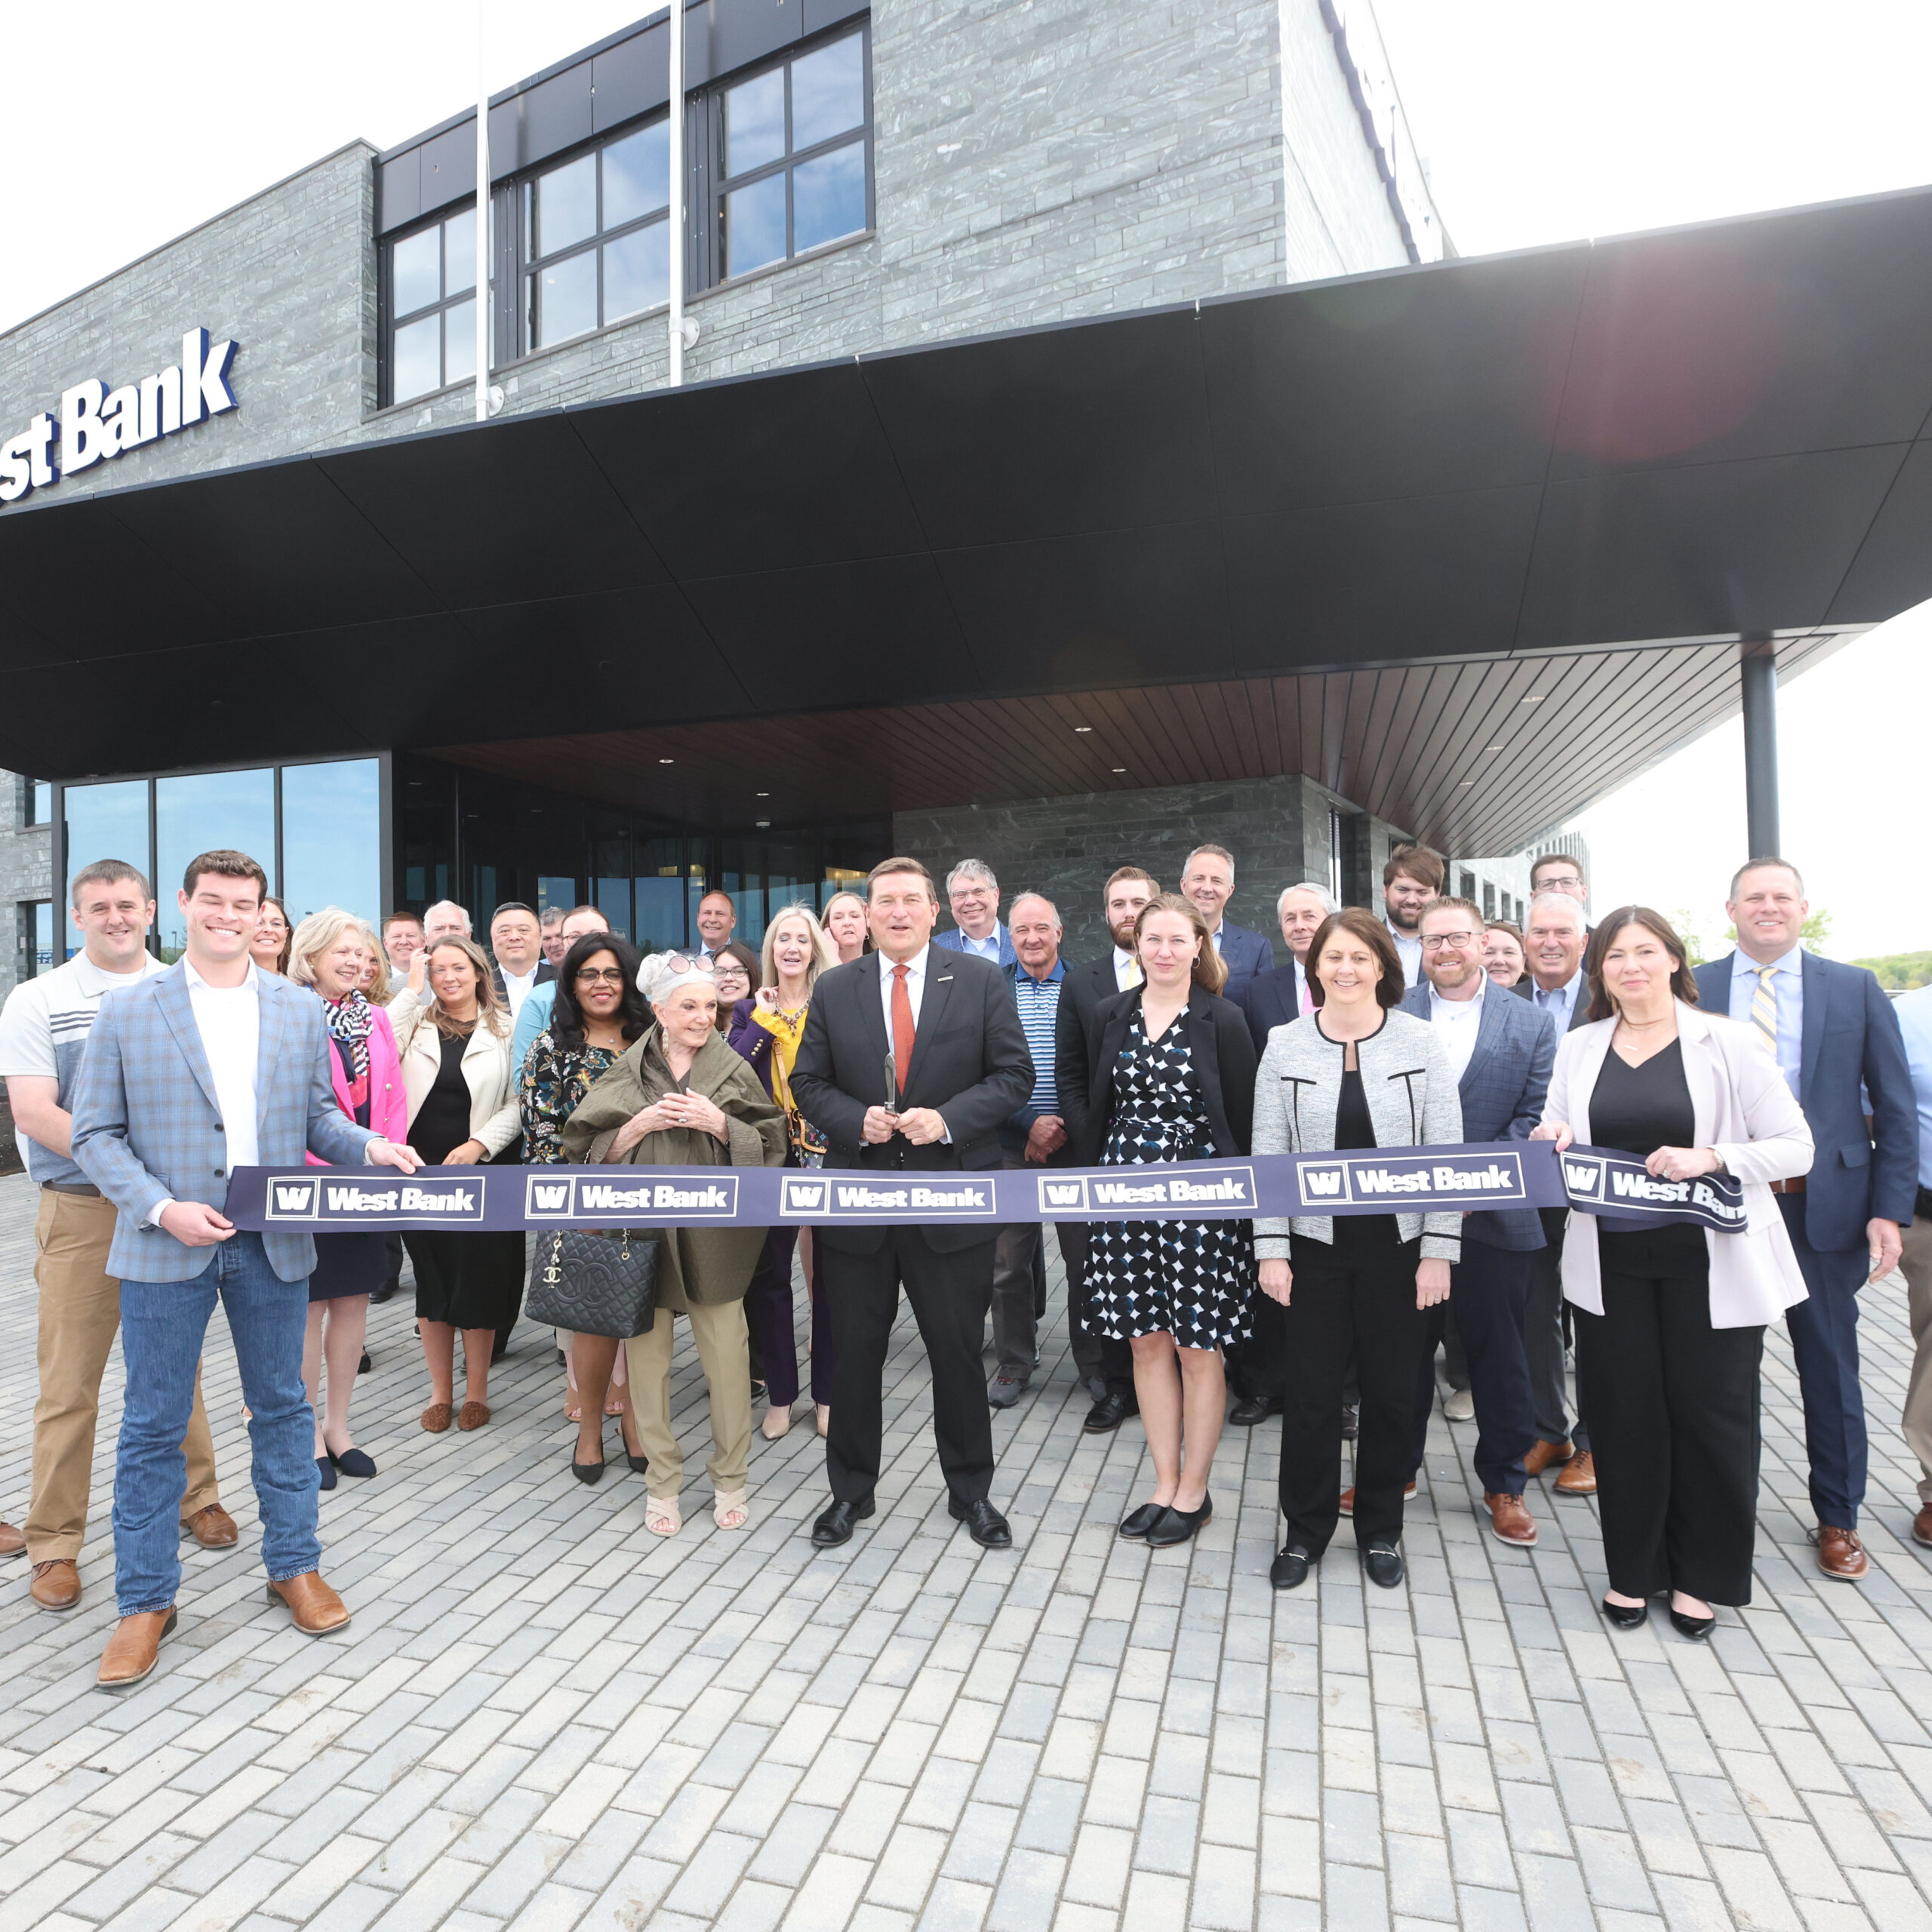 West Bank Holds Ribbon Cutting at New Headquarters